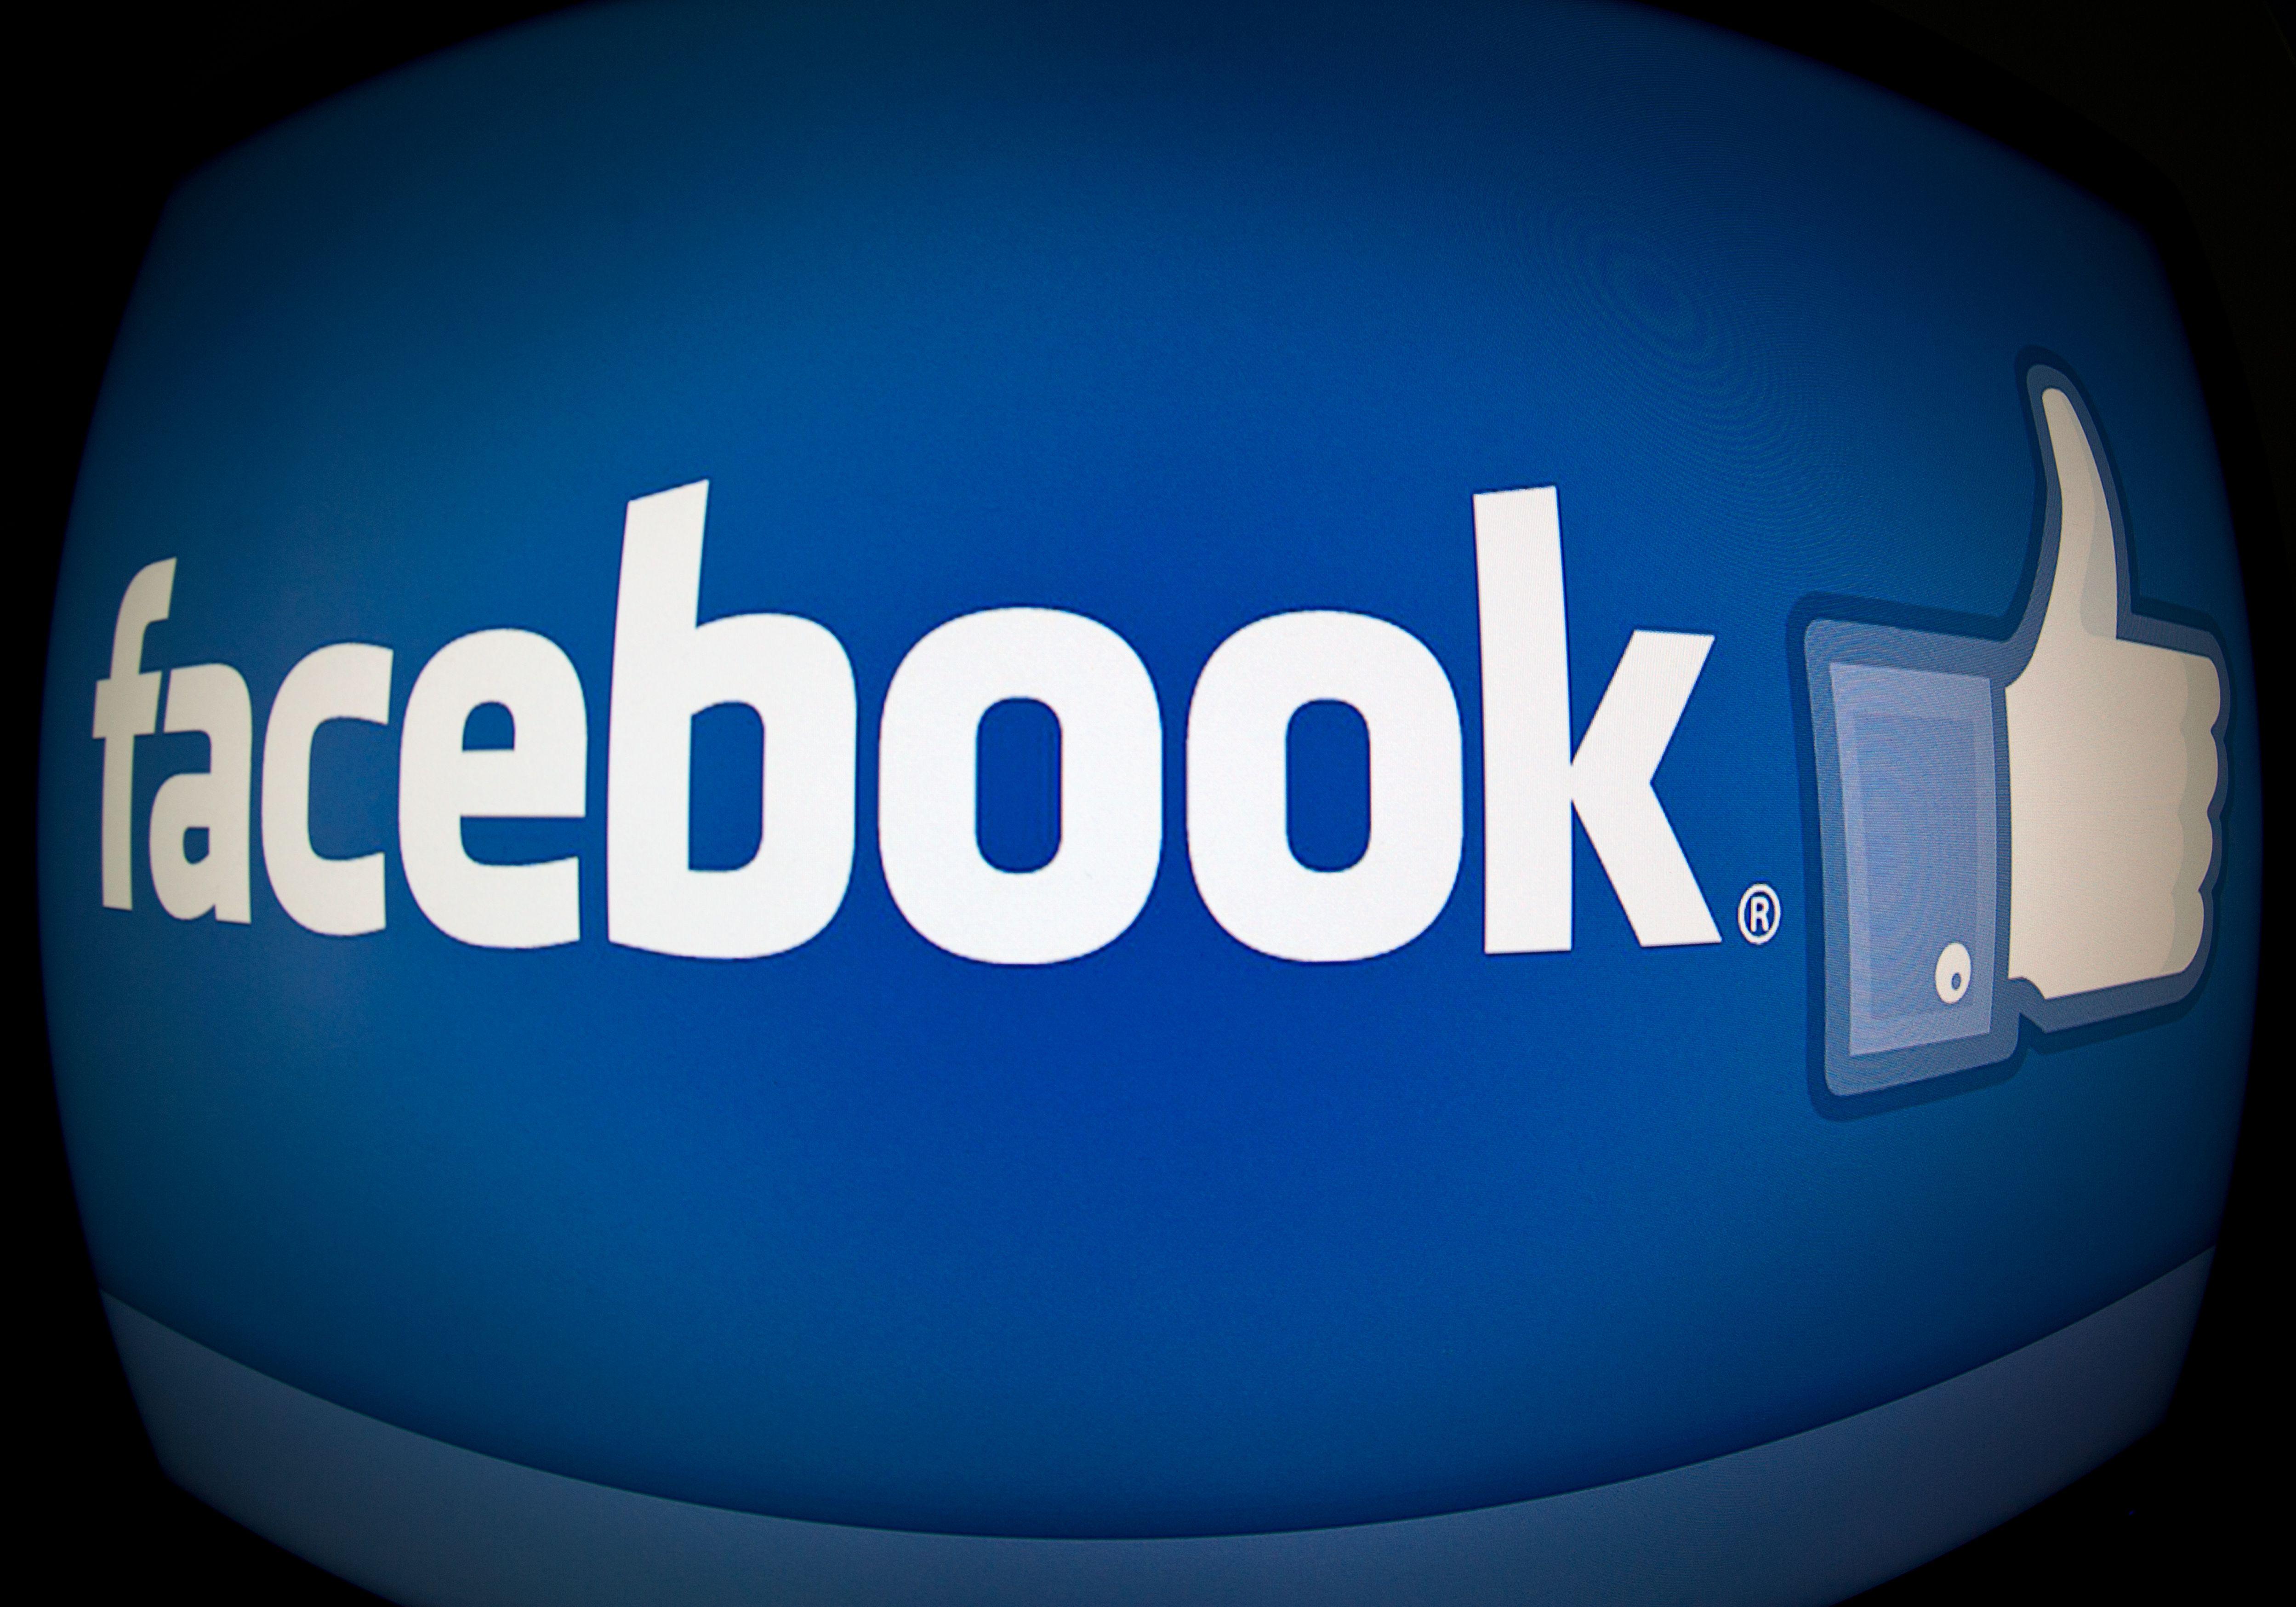 Looking for Facebook Logo - Facebook expands advertising growth to emerging markets: India